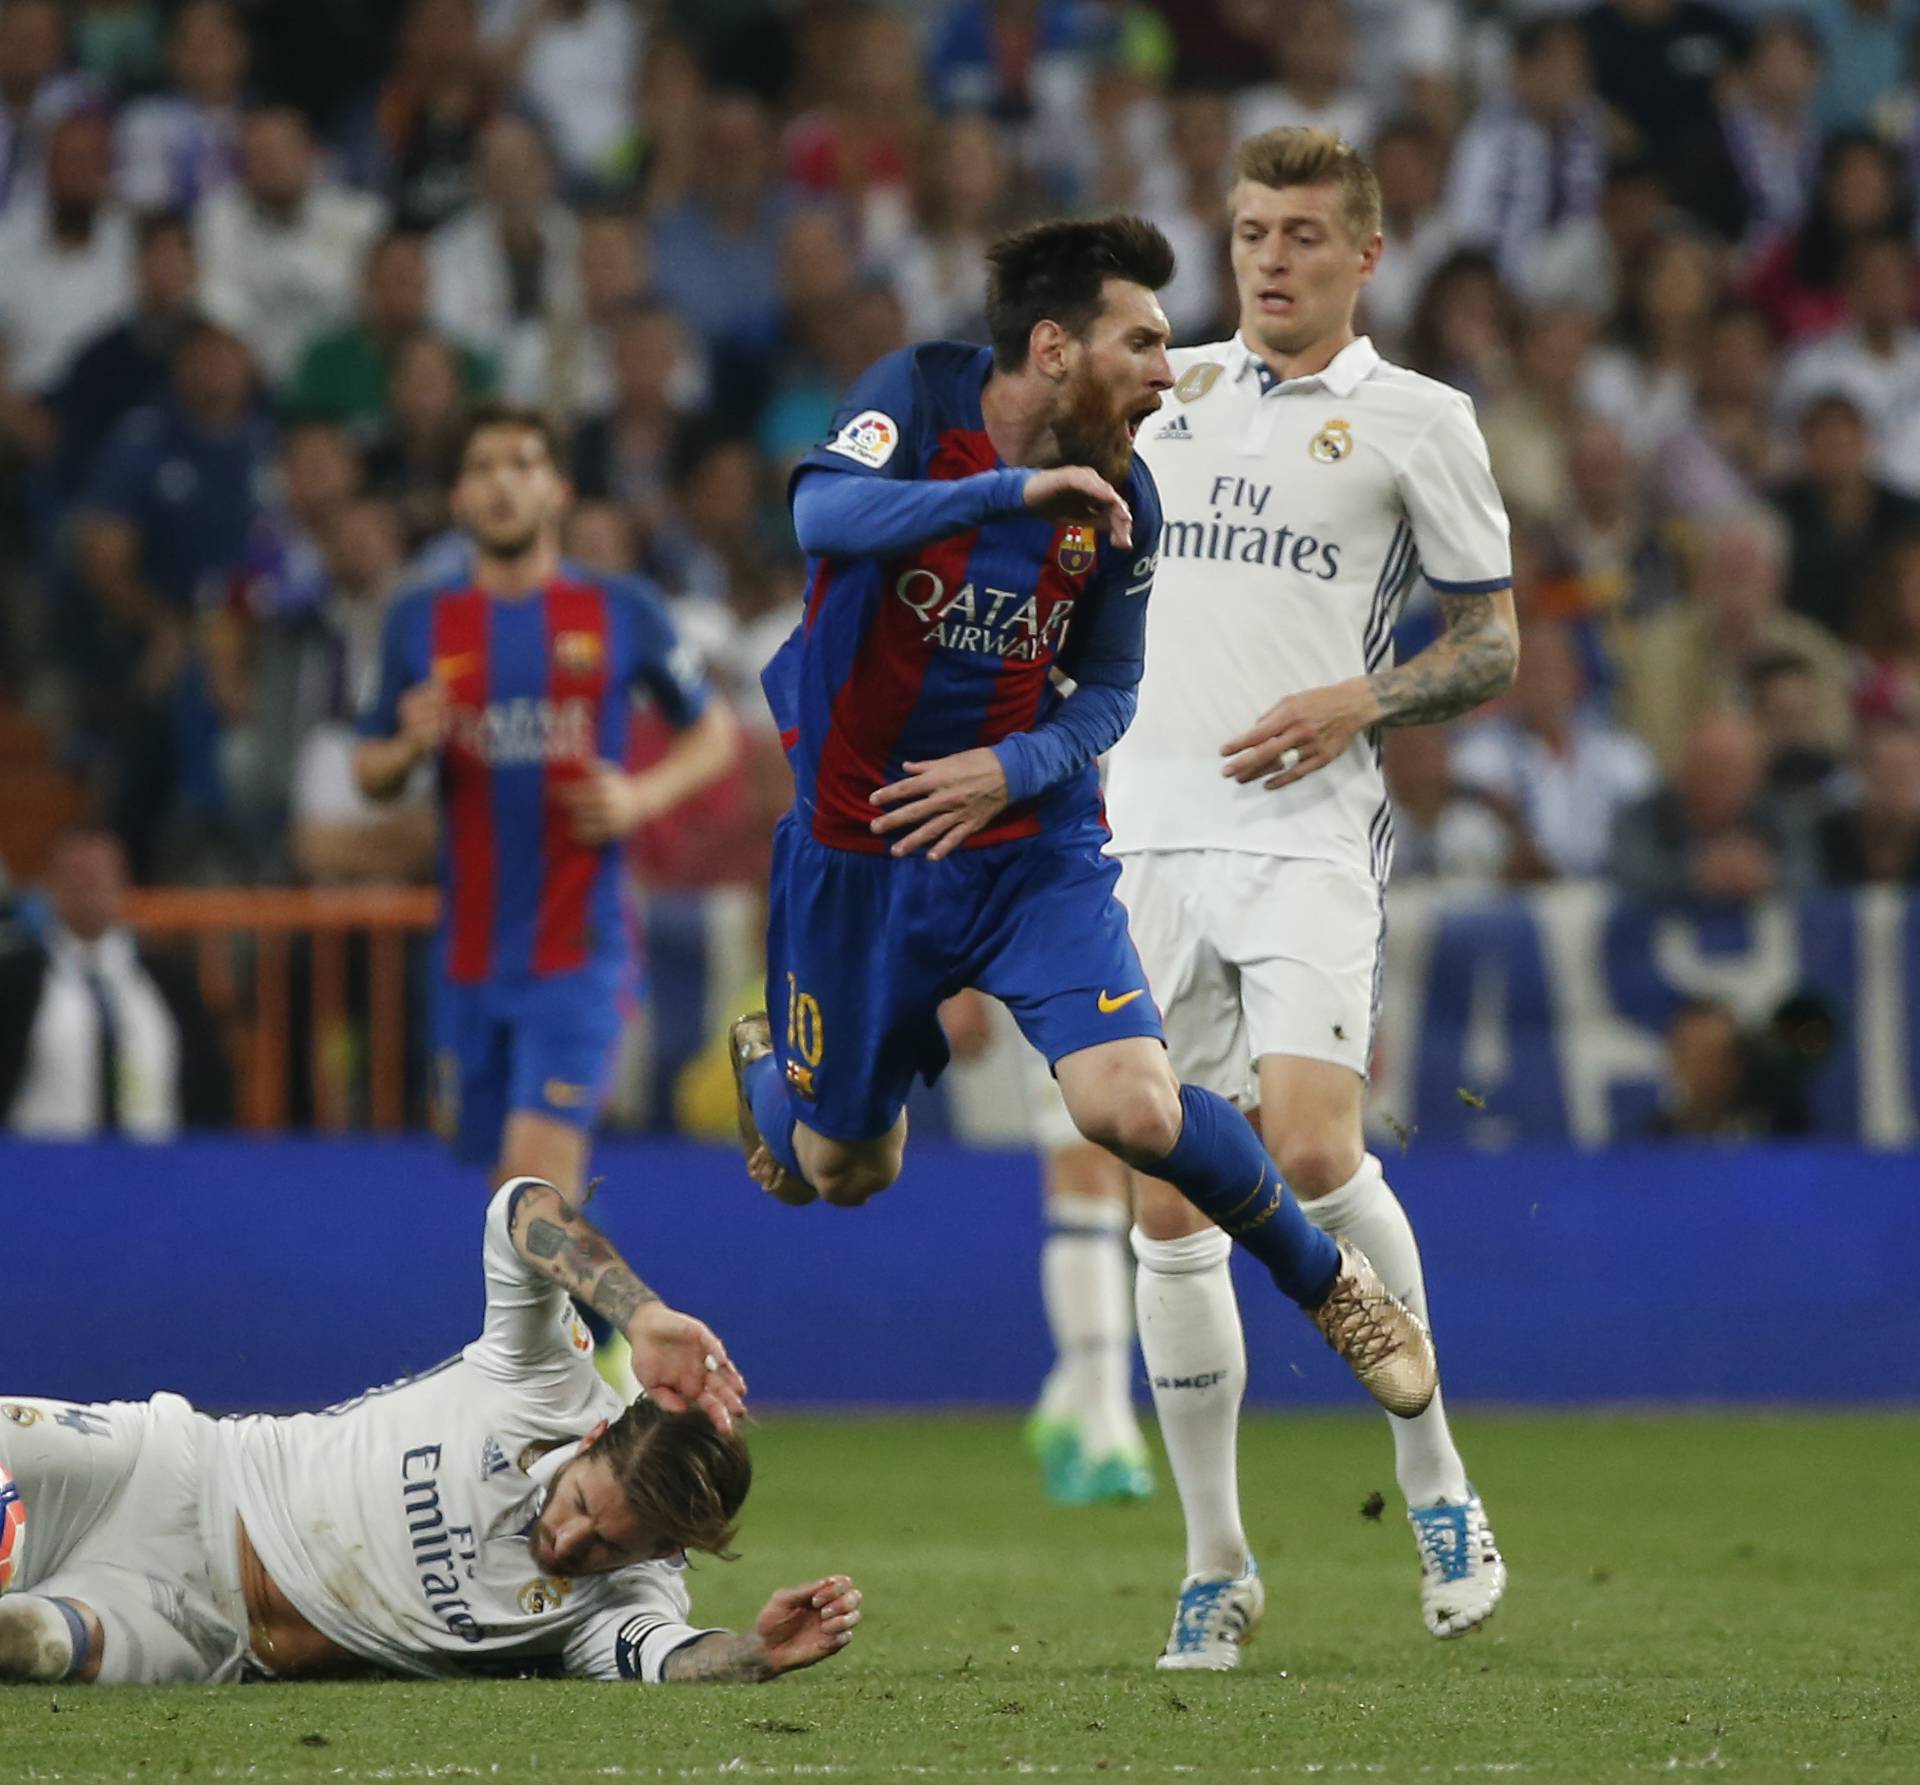 Real Madrid's Sergio Ramos is sent off after this challenge on Barcelona's Lionel Messi